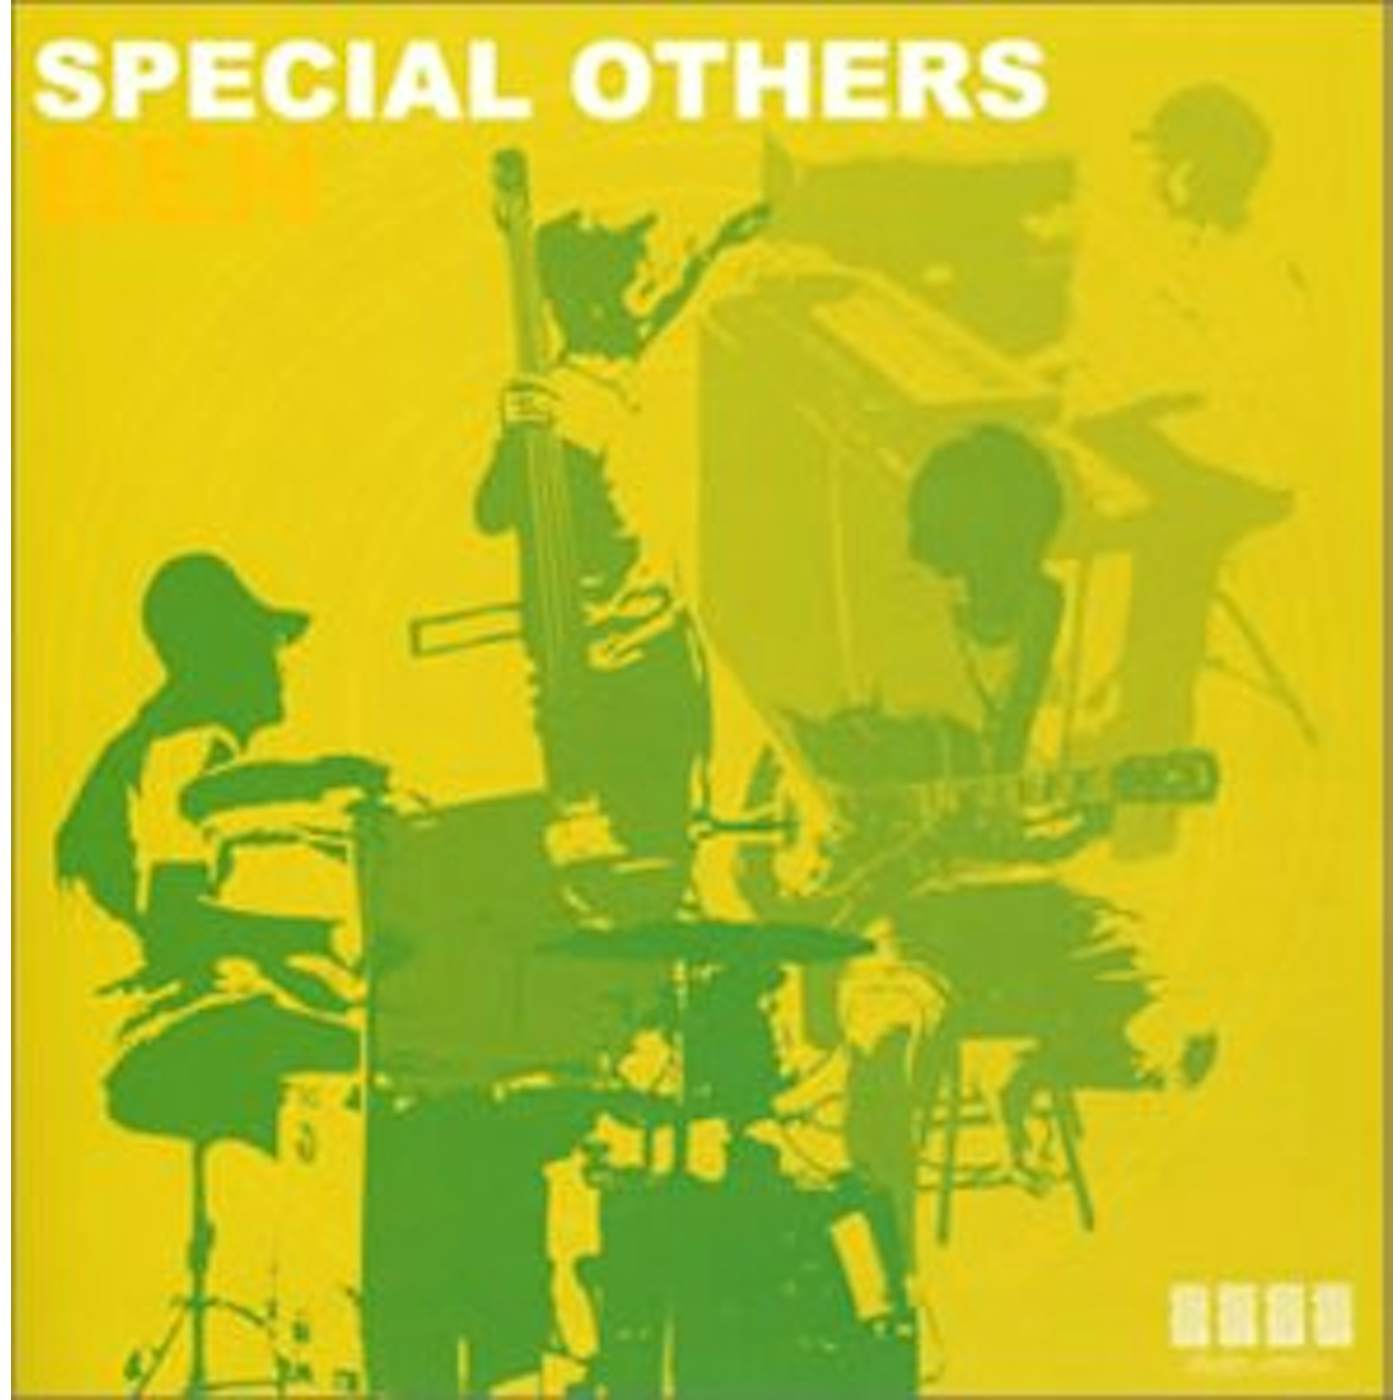 SPECIAL OTHERS BEN CD